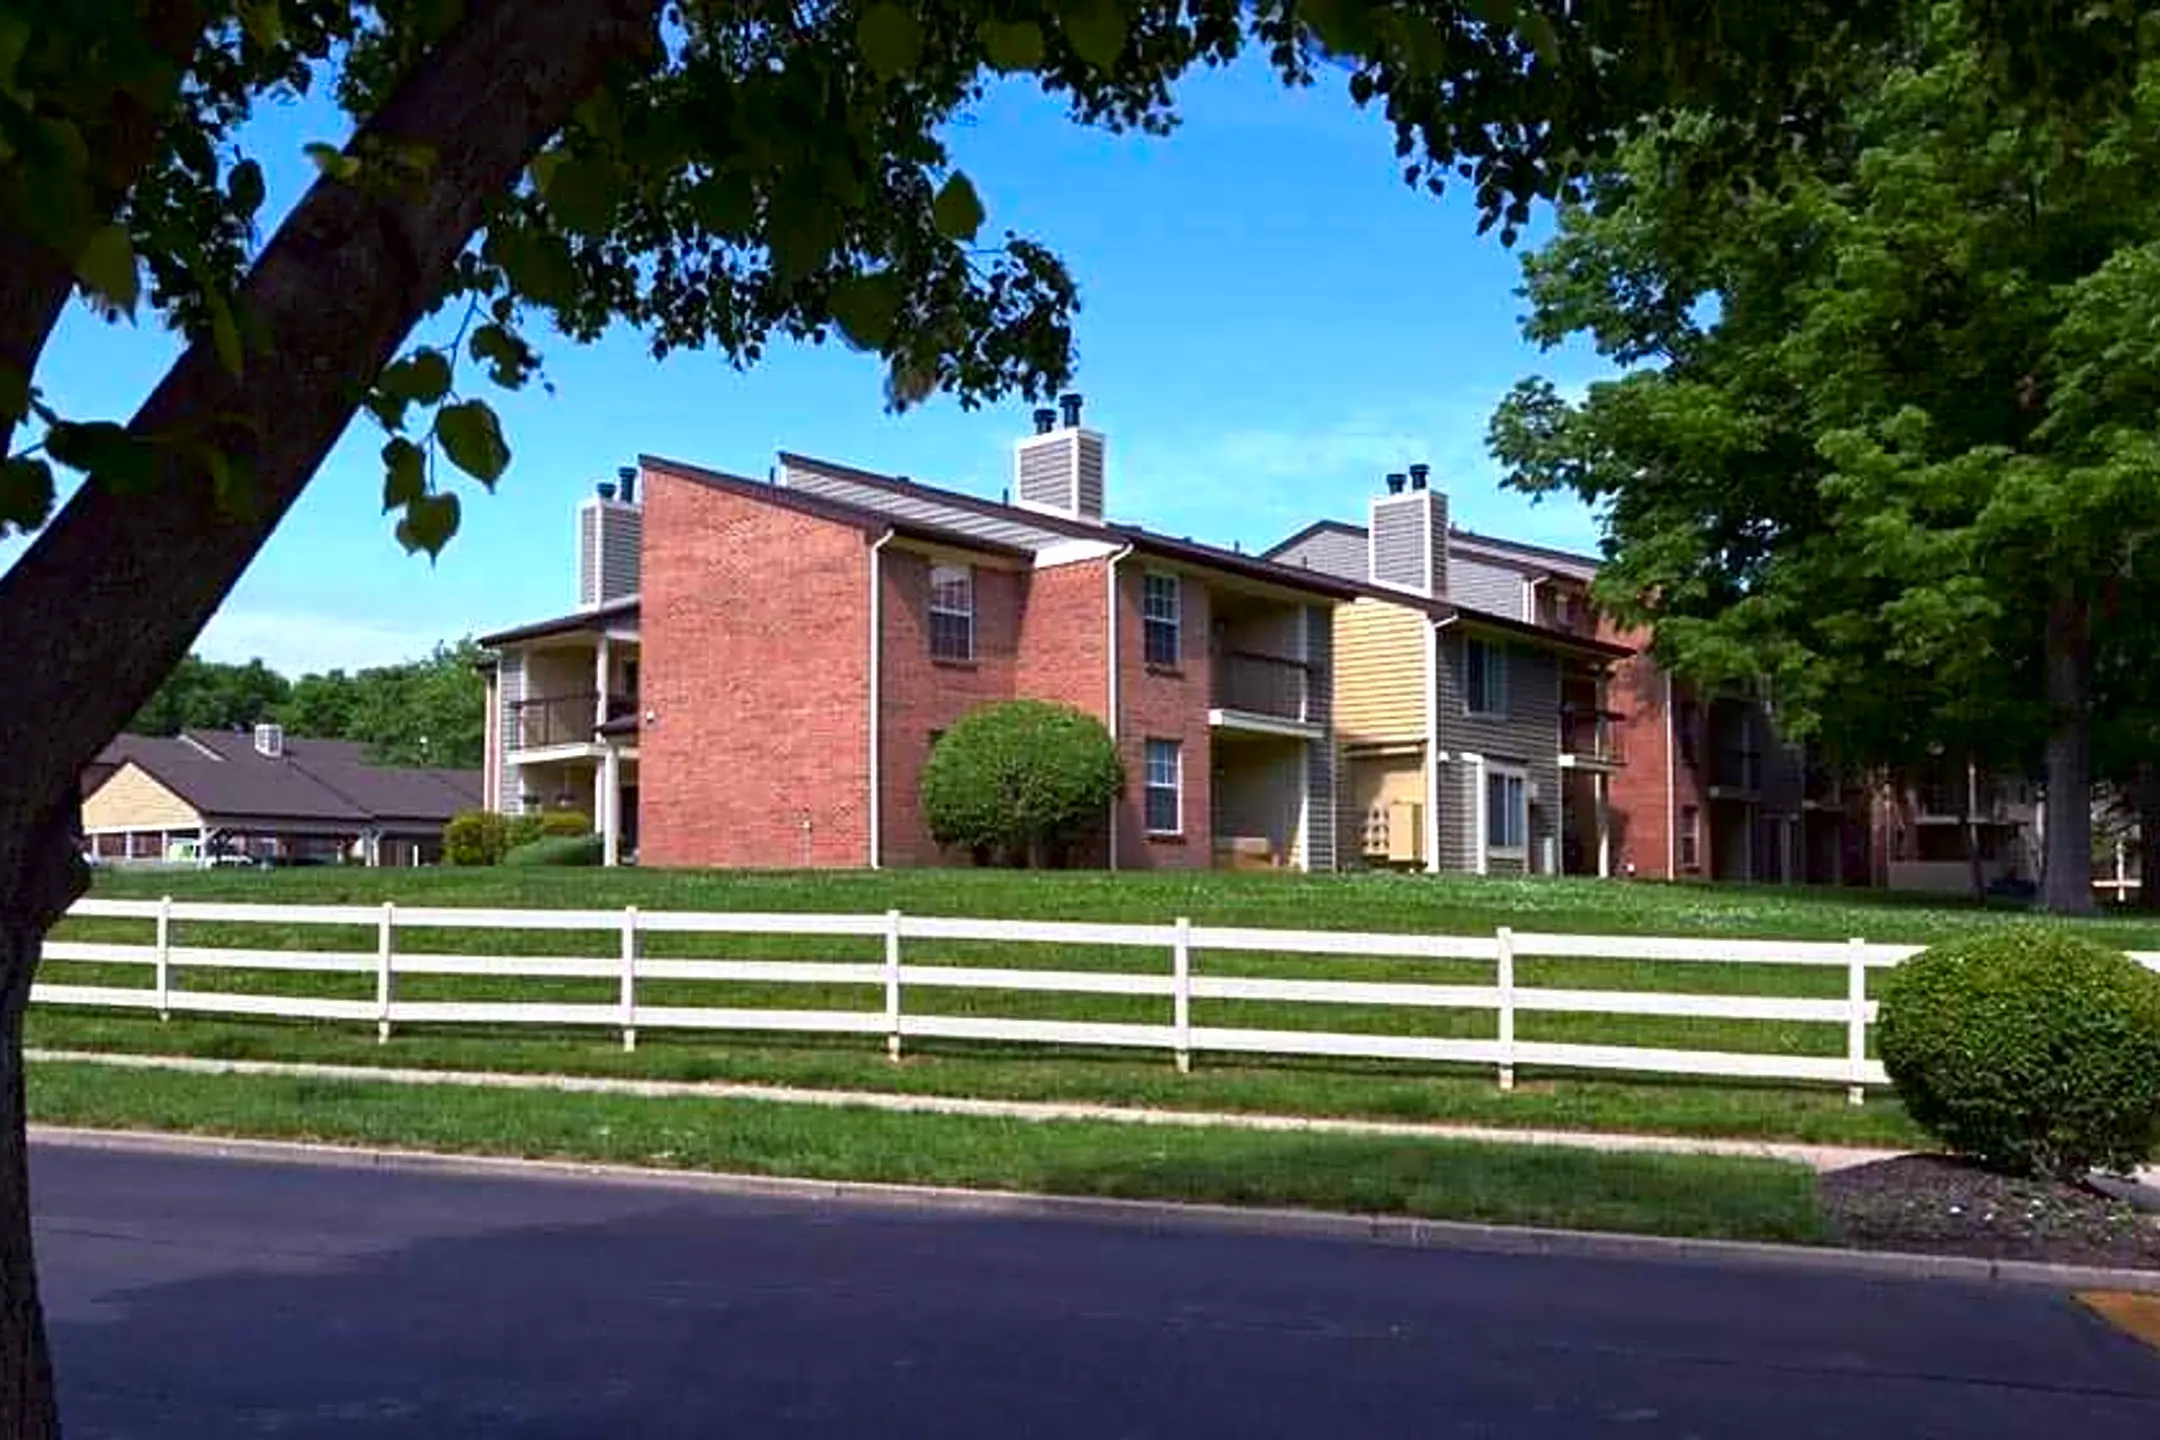 Building - Steeplechase Apartments - Centerville, OH